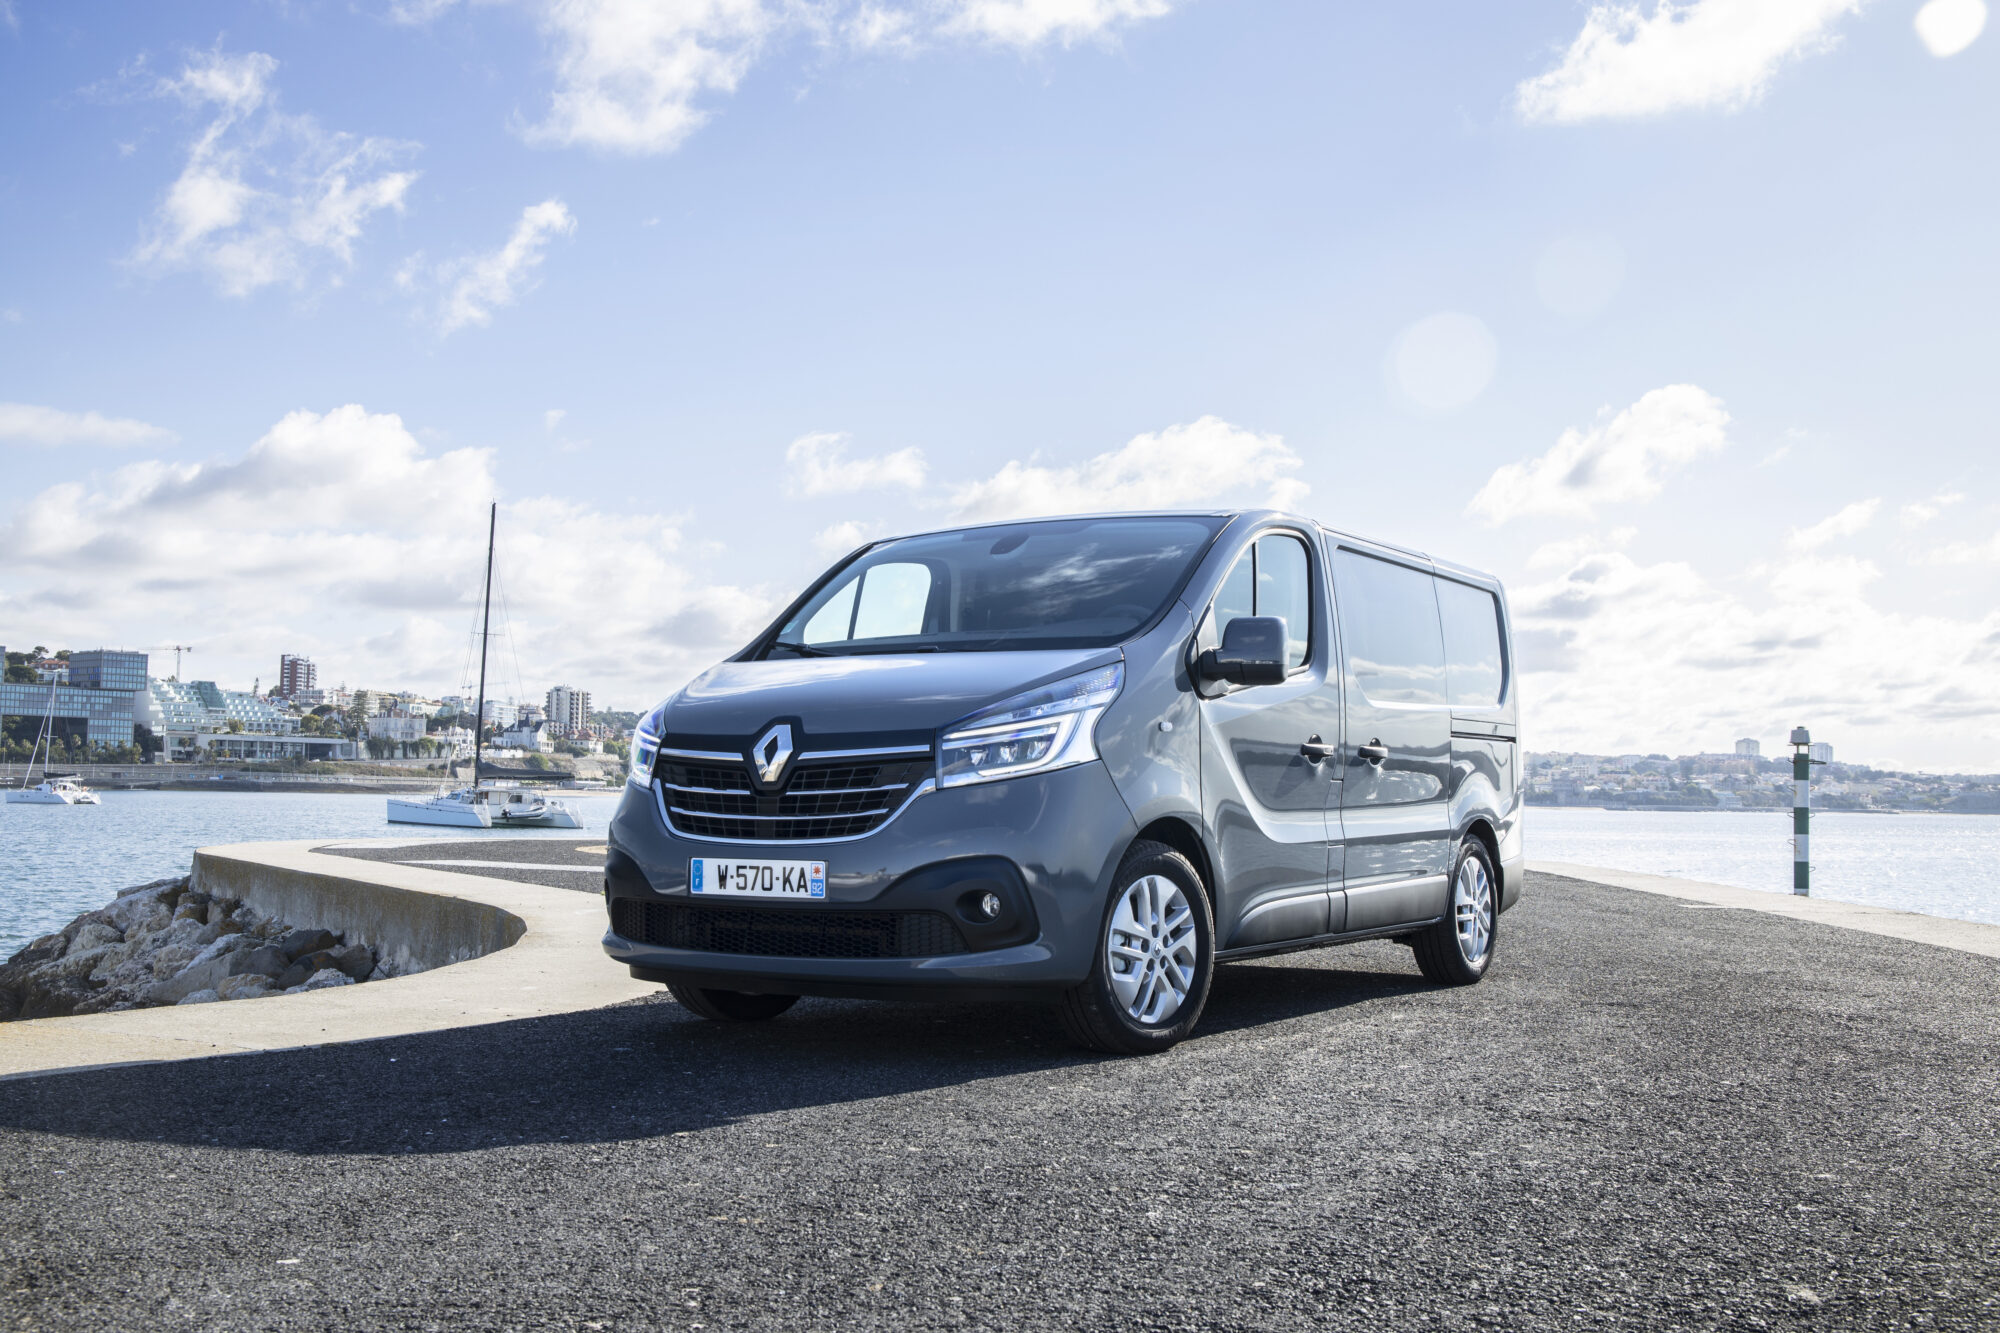 2019 - New Renault TRAFIC press tests in Portugal